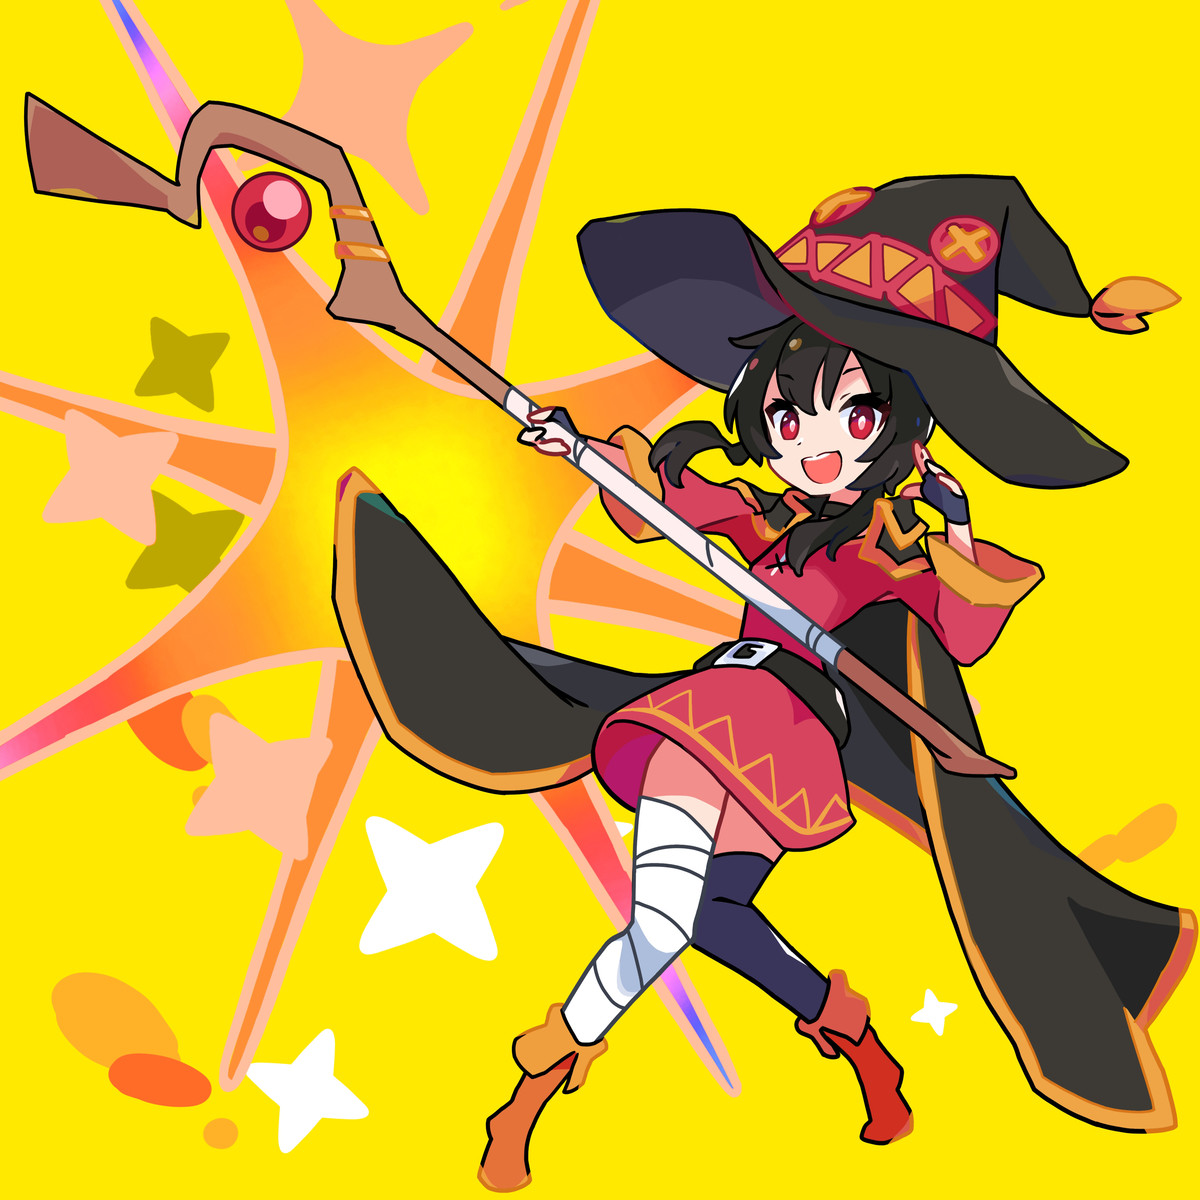 Daily Megu - 1118: Big Explosion. join list: DailySplosion (827 subs)Mention History Source: .